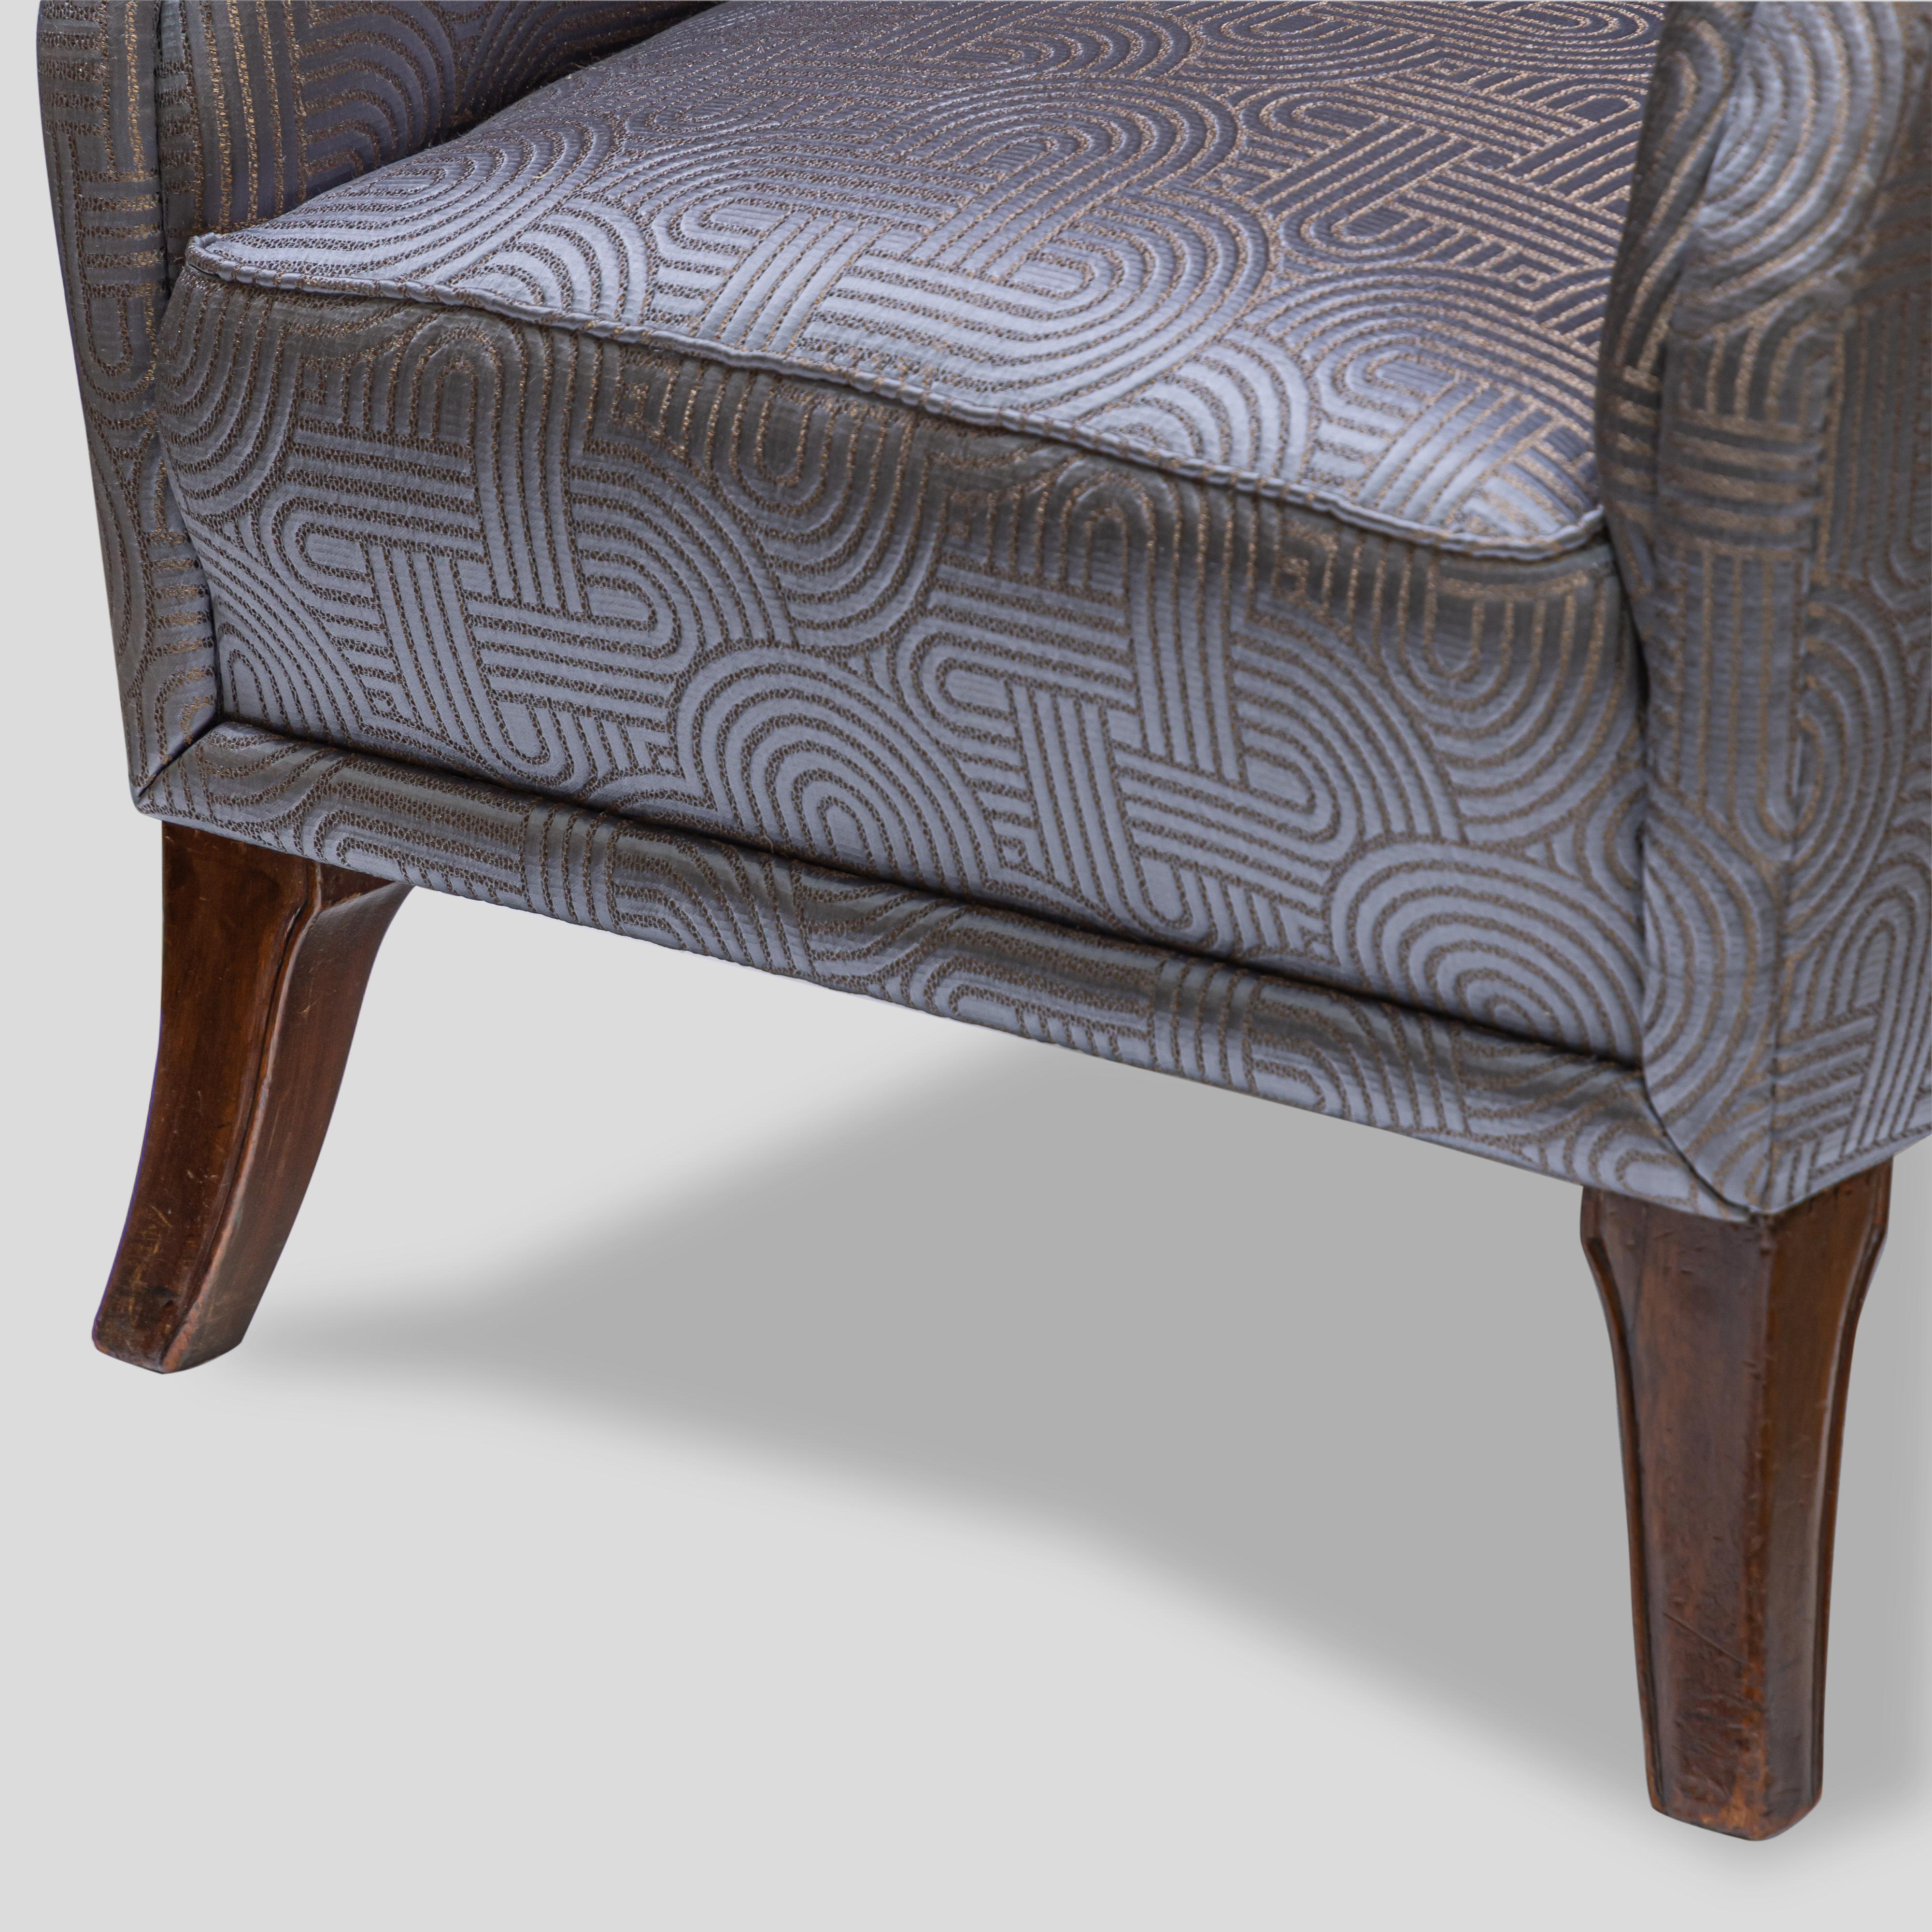 Mid-20th Century 1930s Art Deco French Design Armchair in Satin Grey Upholstery Wall Nut Wood For Sale